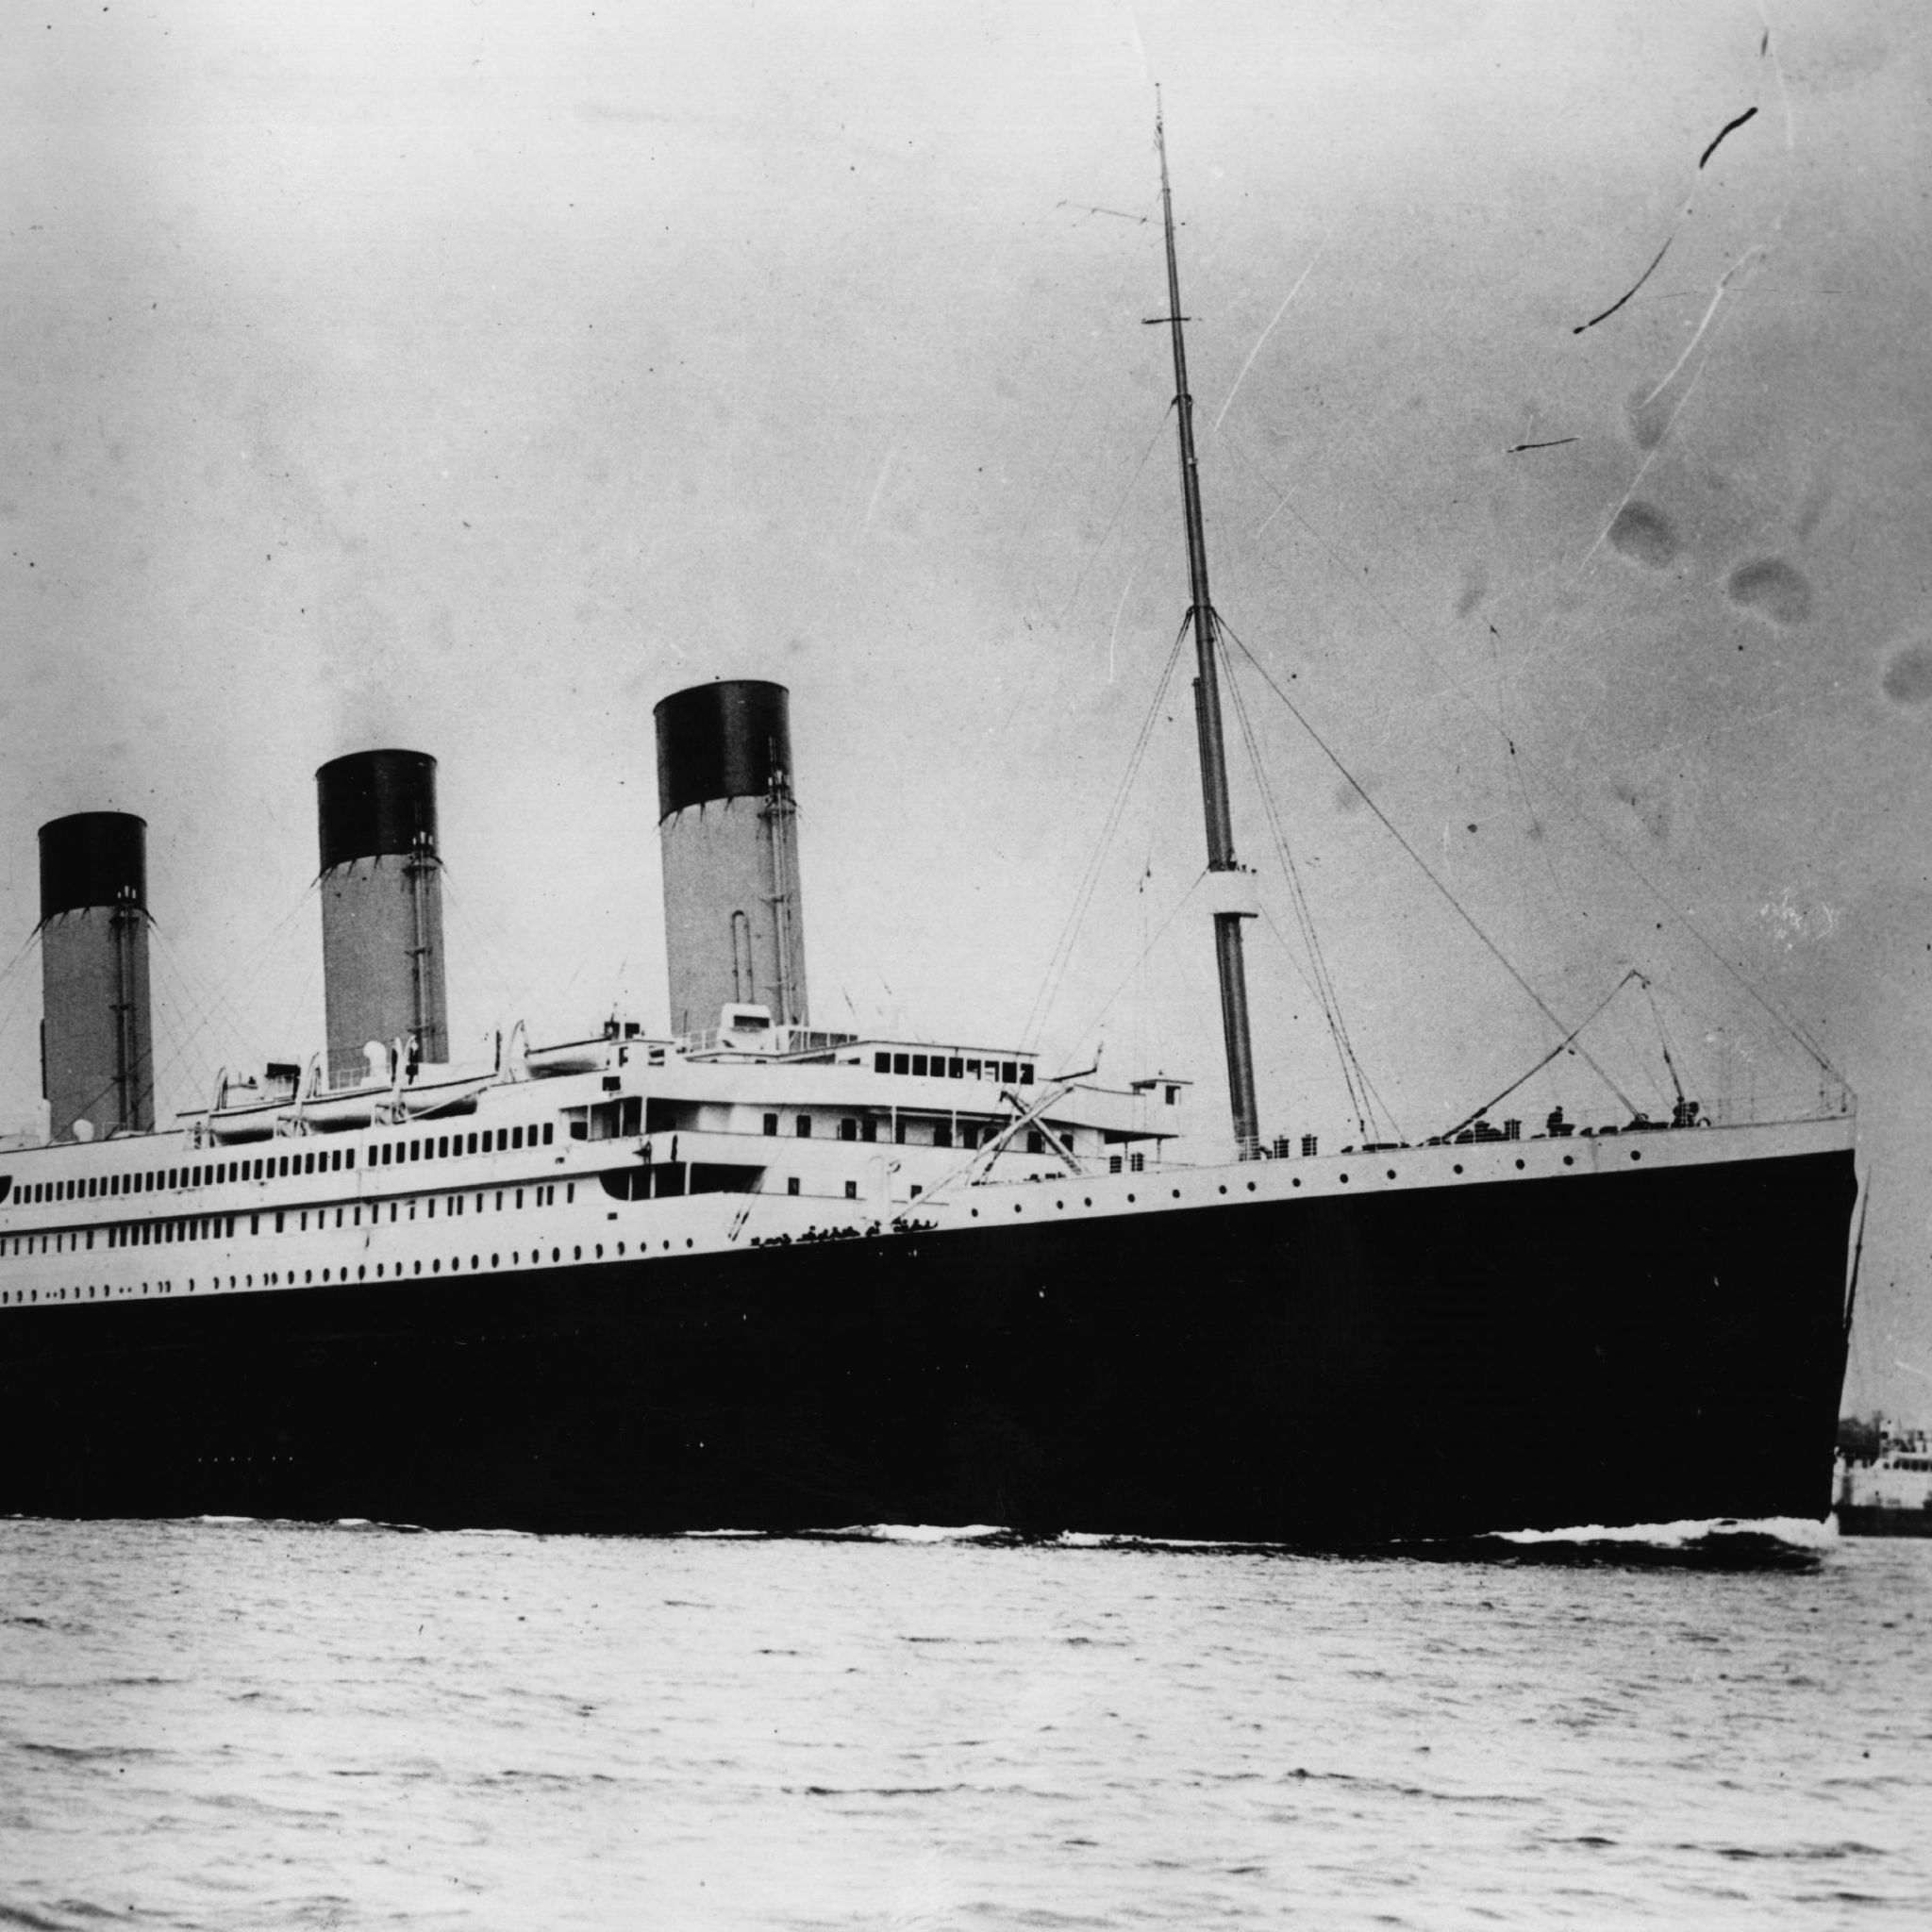 PSA: apparently the Titanic didn't actually sink after all